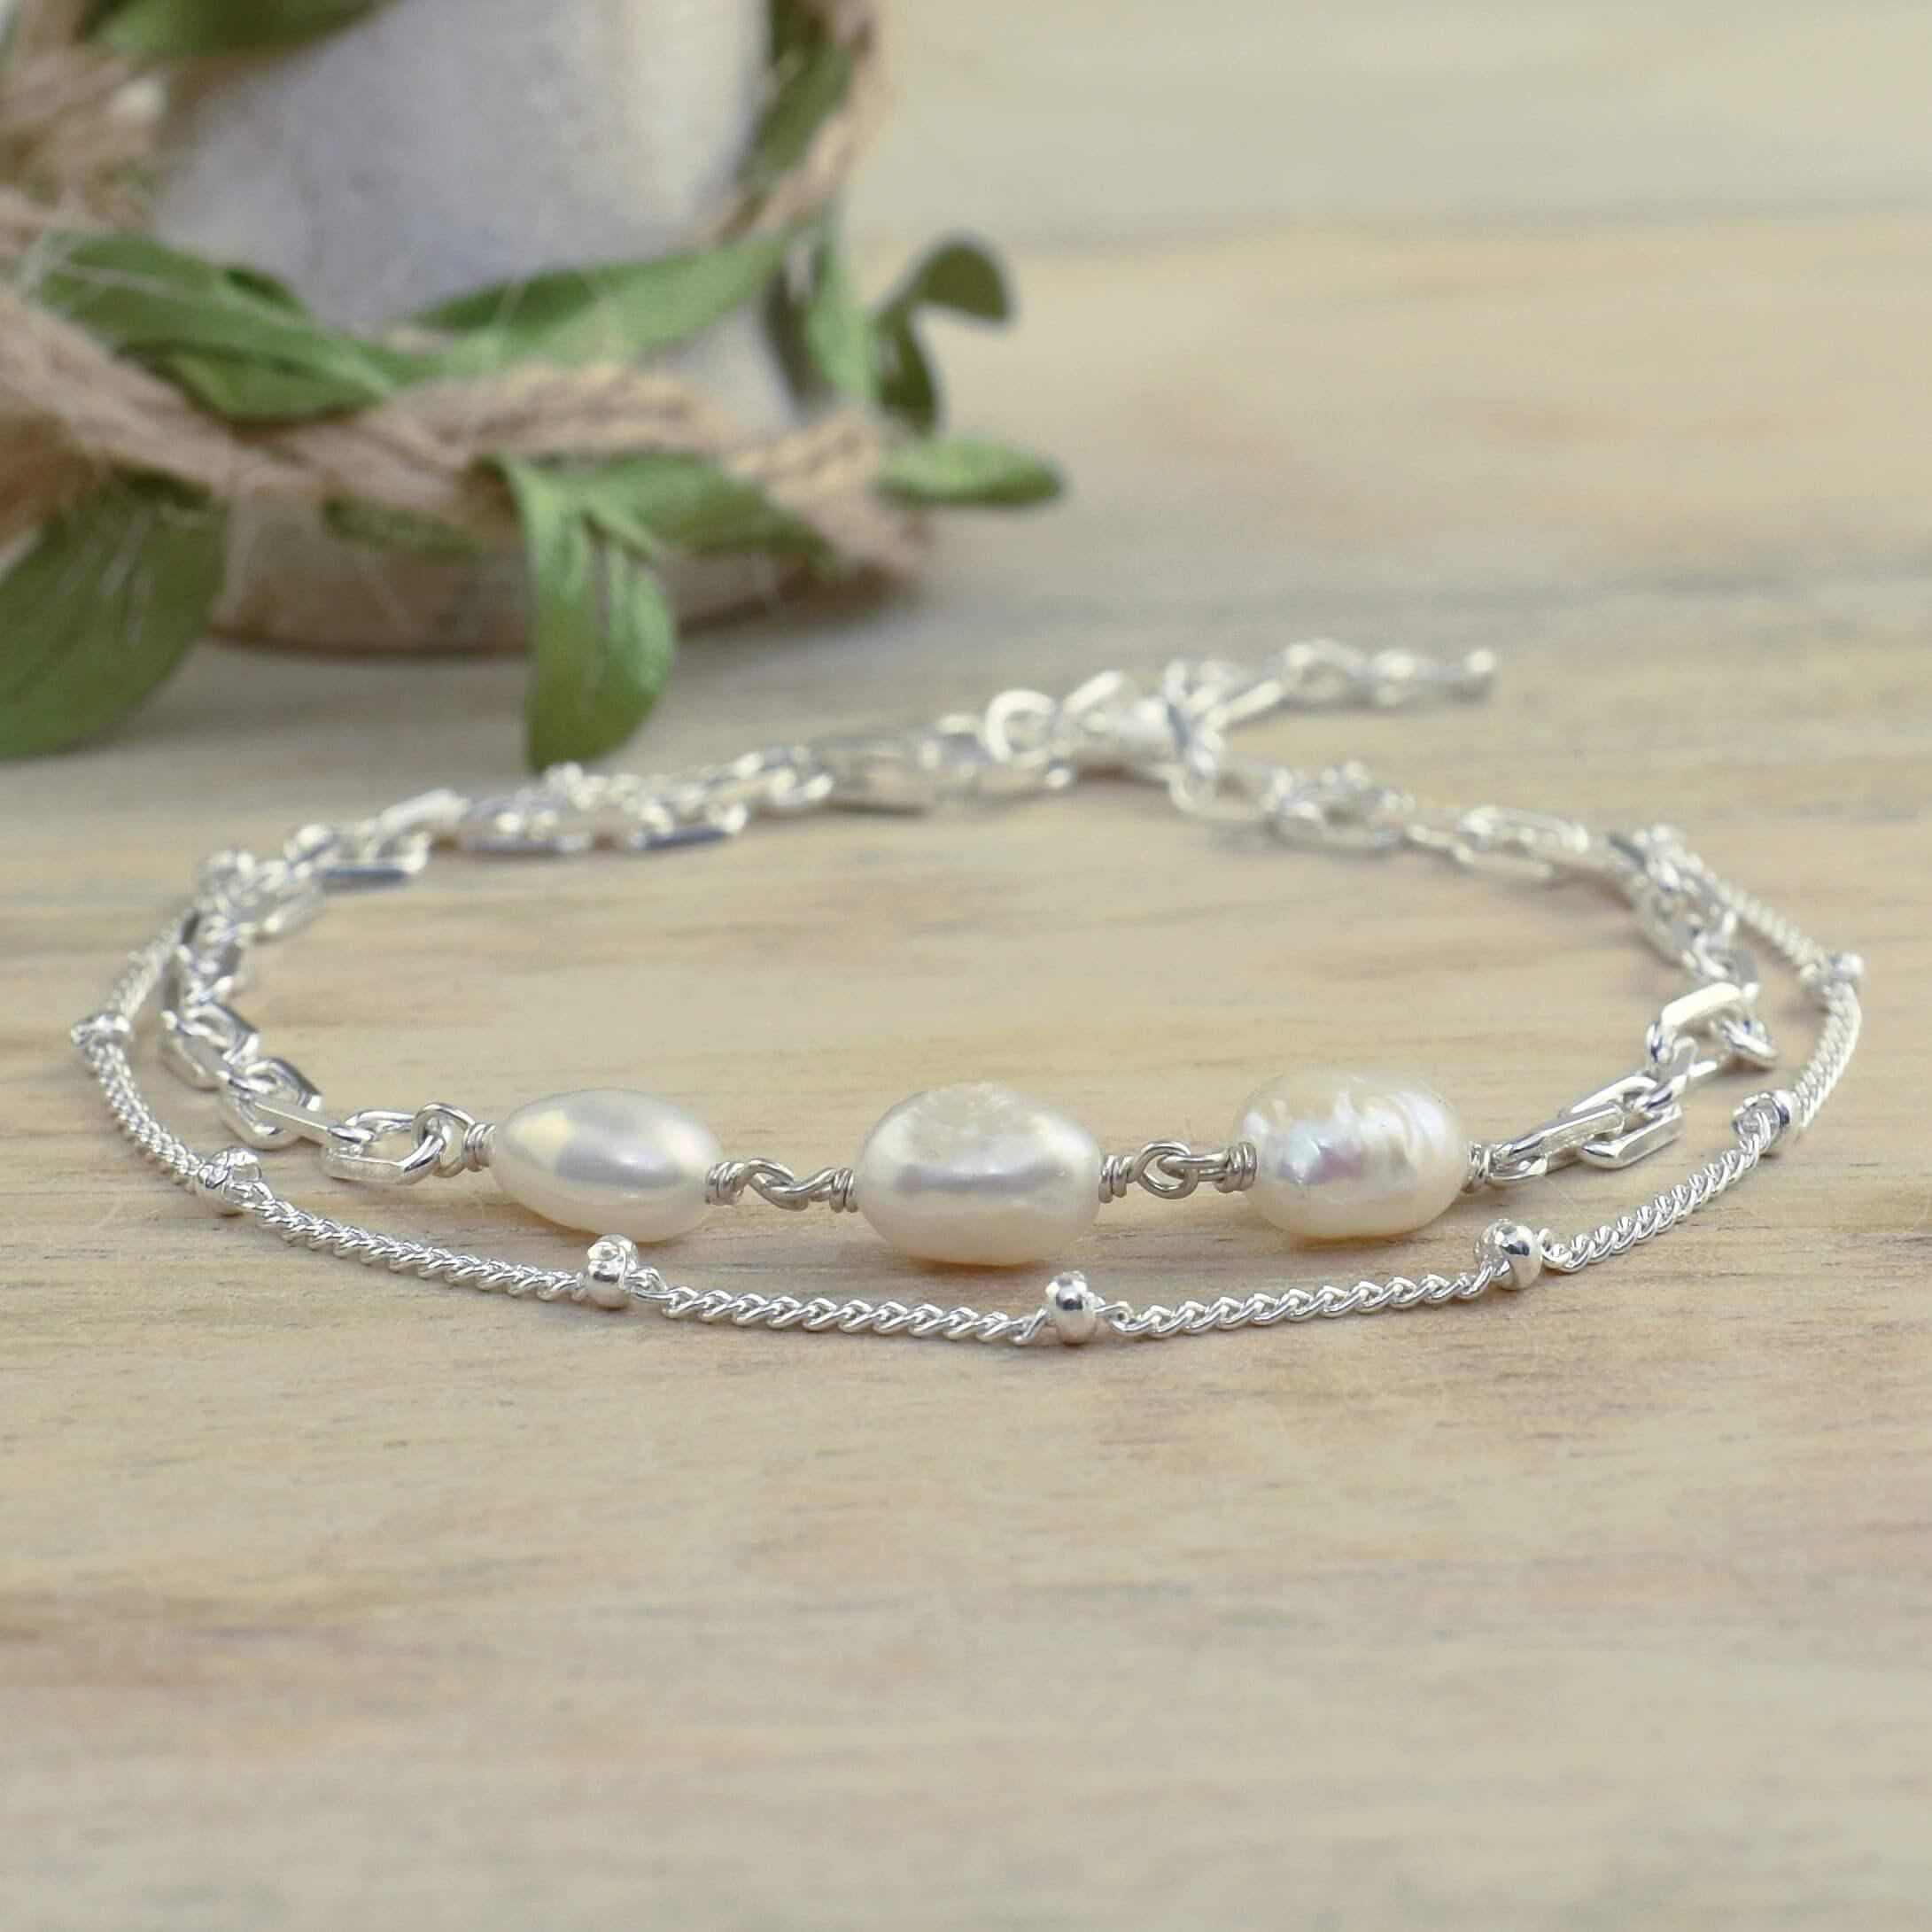 double.925 sterling silver bracelet with freshwater pearls